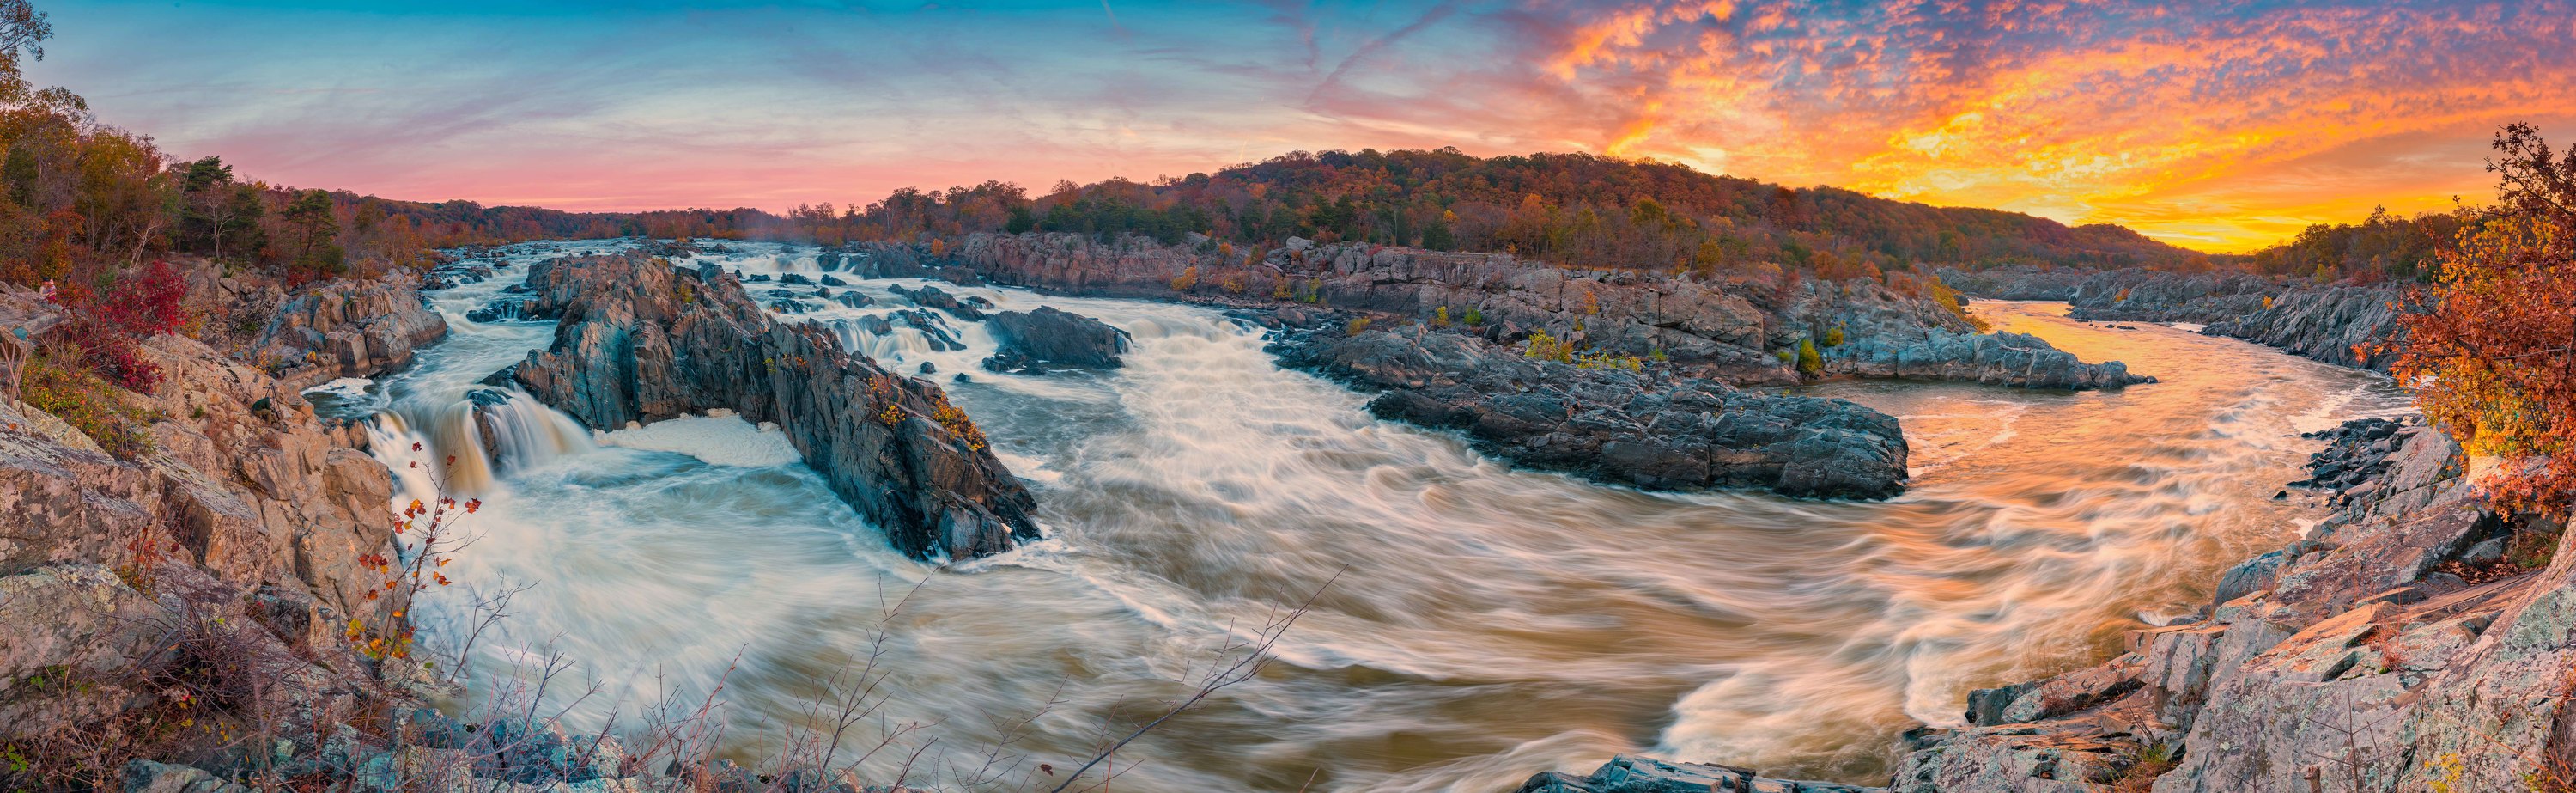 White rapids swirl and eddy as the Potomac River rushes through rocky formations at Great Falls as the sun rises.